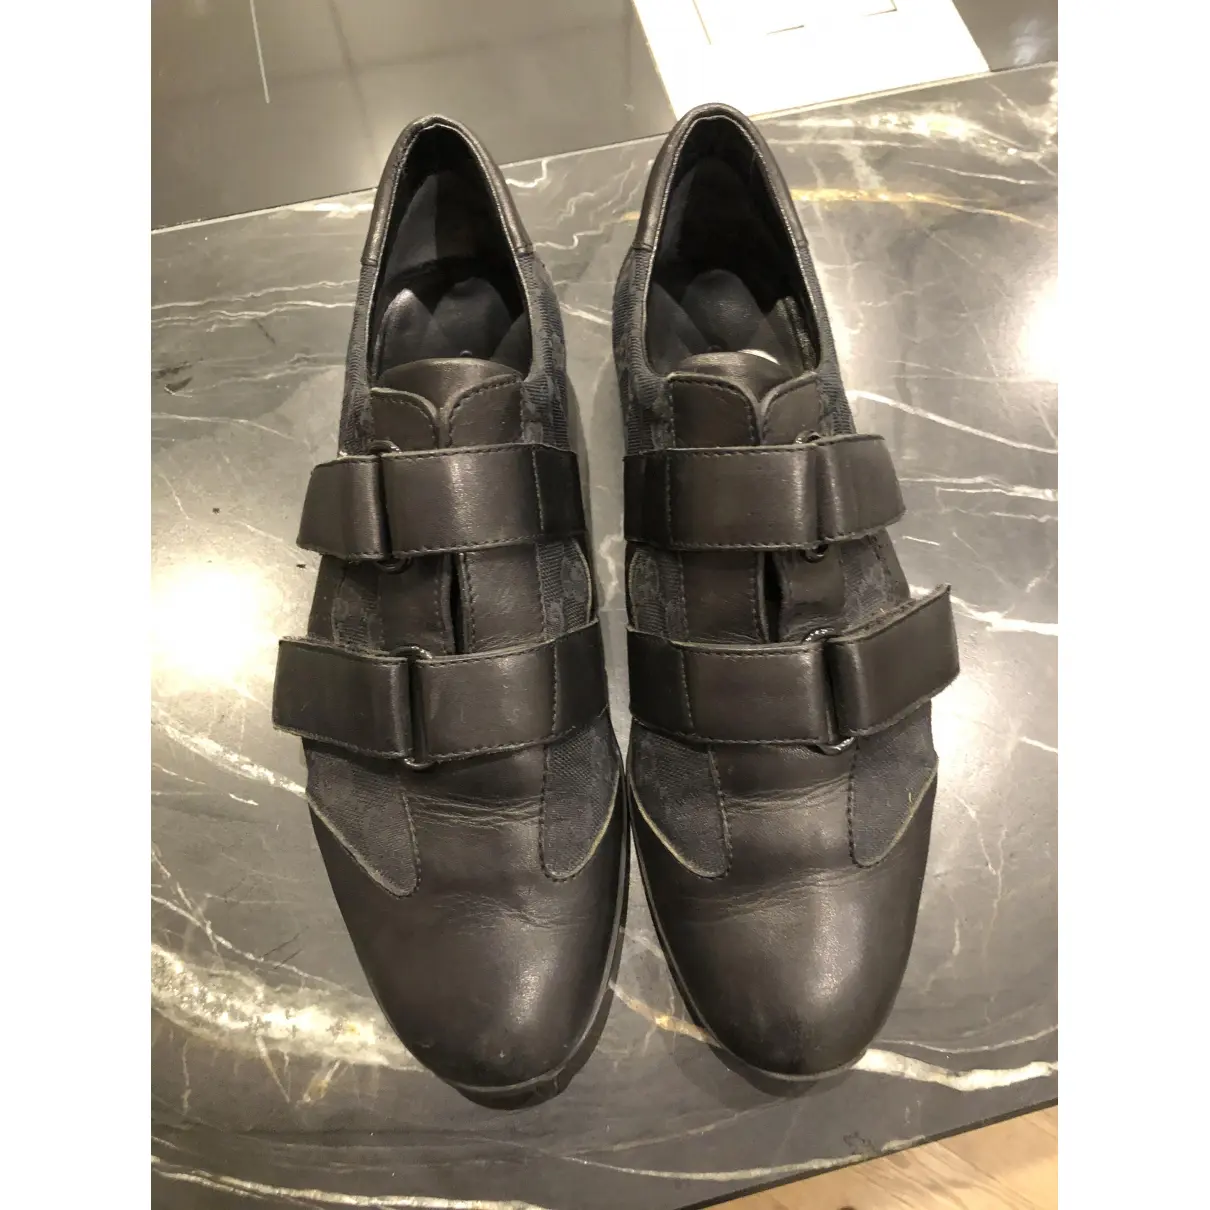 Buy Gucci Leather trainers online